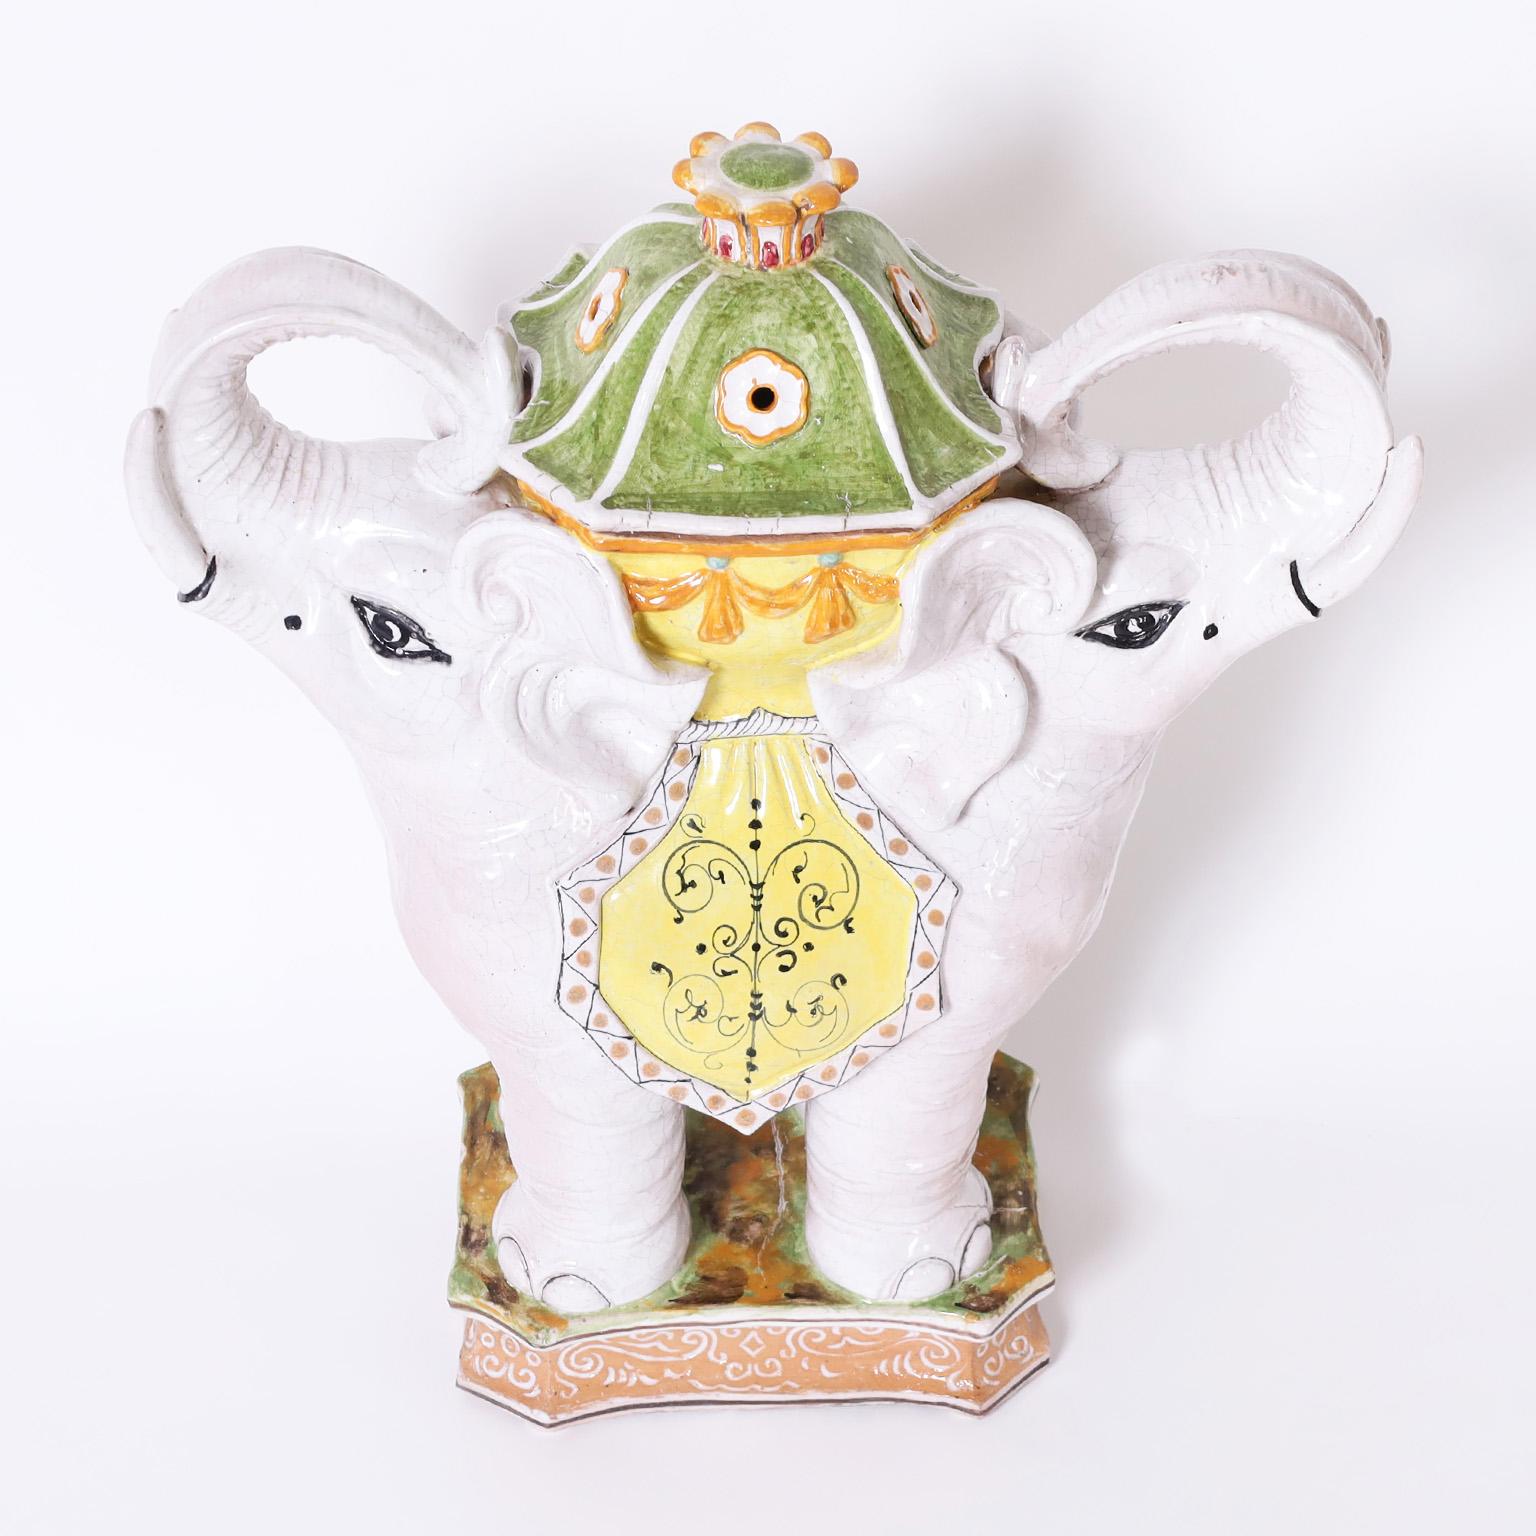 Whimsical mid century Italian glazed earthenware stand decorated with distinctive Mediterranean colors over a dramatic double elephant form supporting a lidded urn.